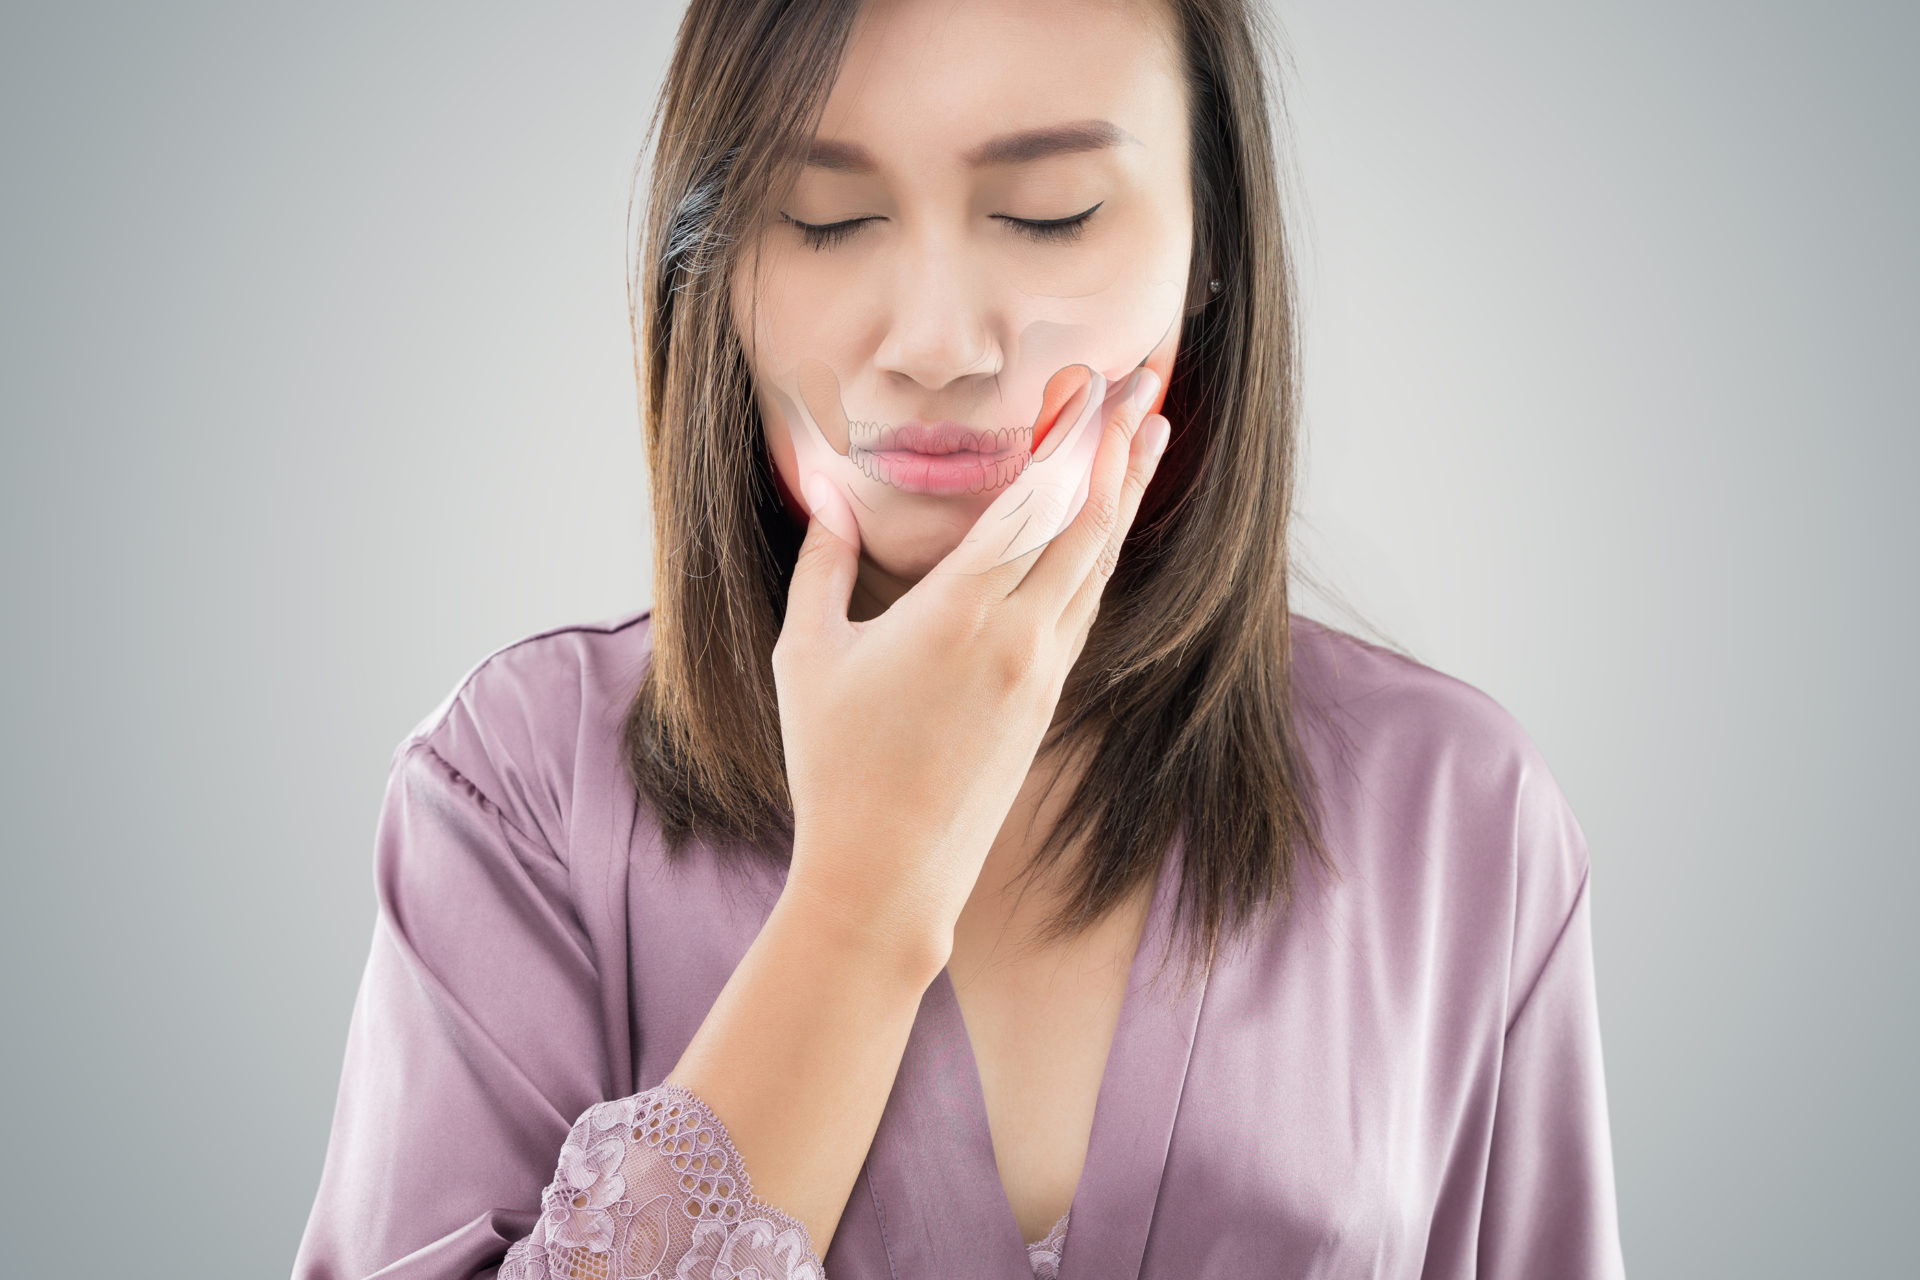 Temporomandibular Joint and Muscle Disorder: TMD, Suffering from toothache. Beautiful young woman suffering from toothache while standing against grey background